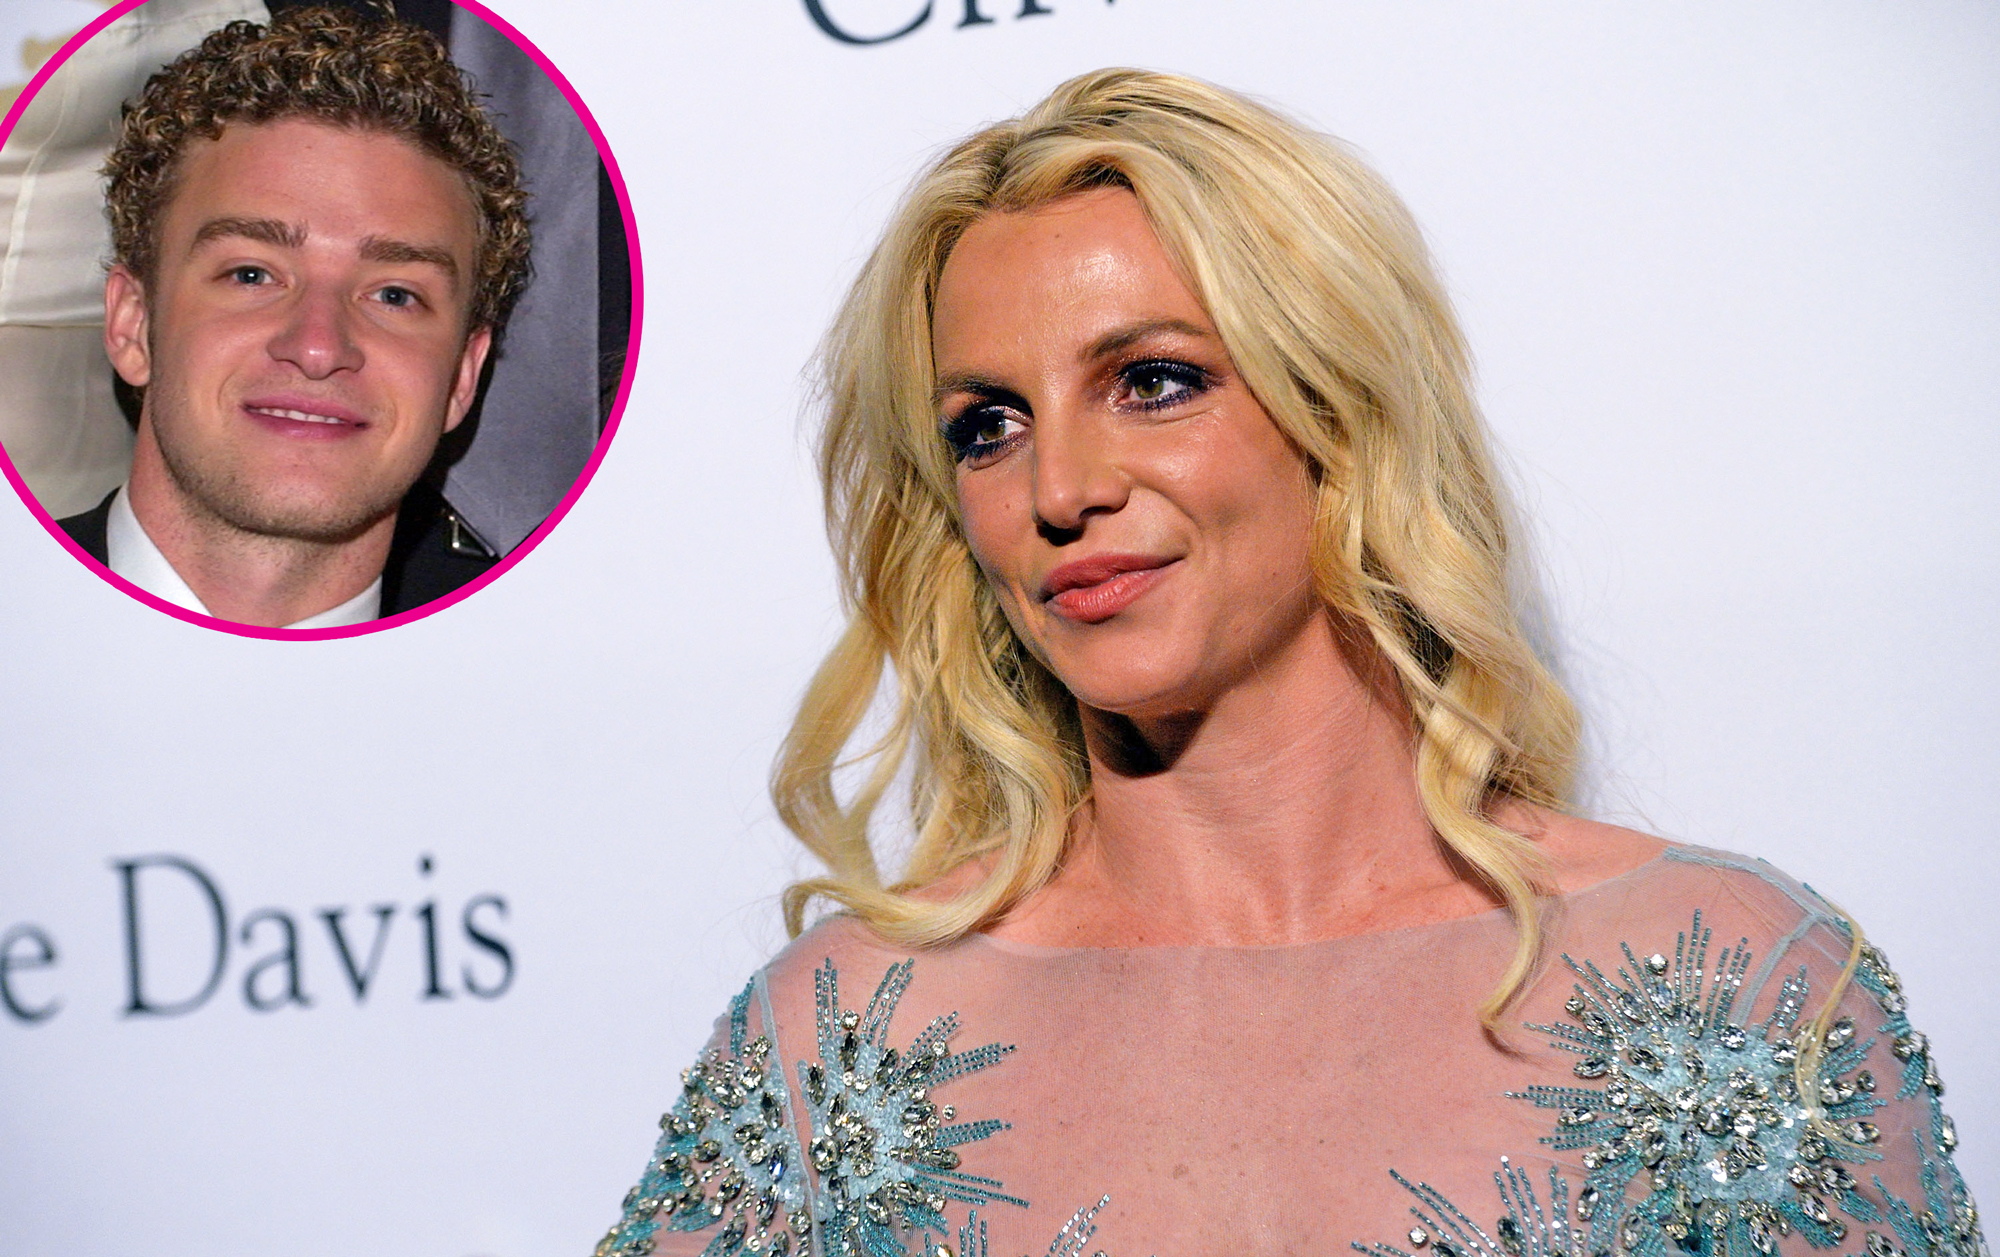 Britney will cut her break short and return to recording